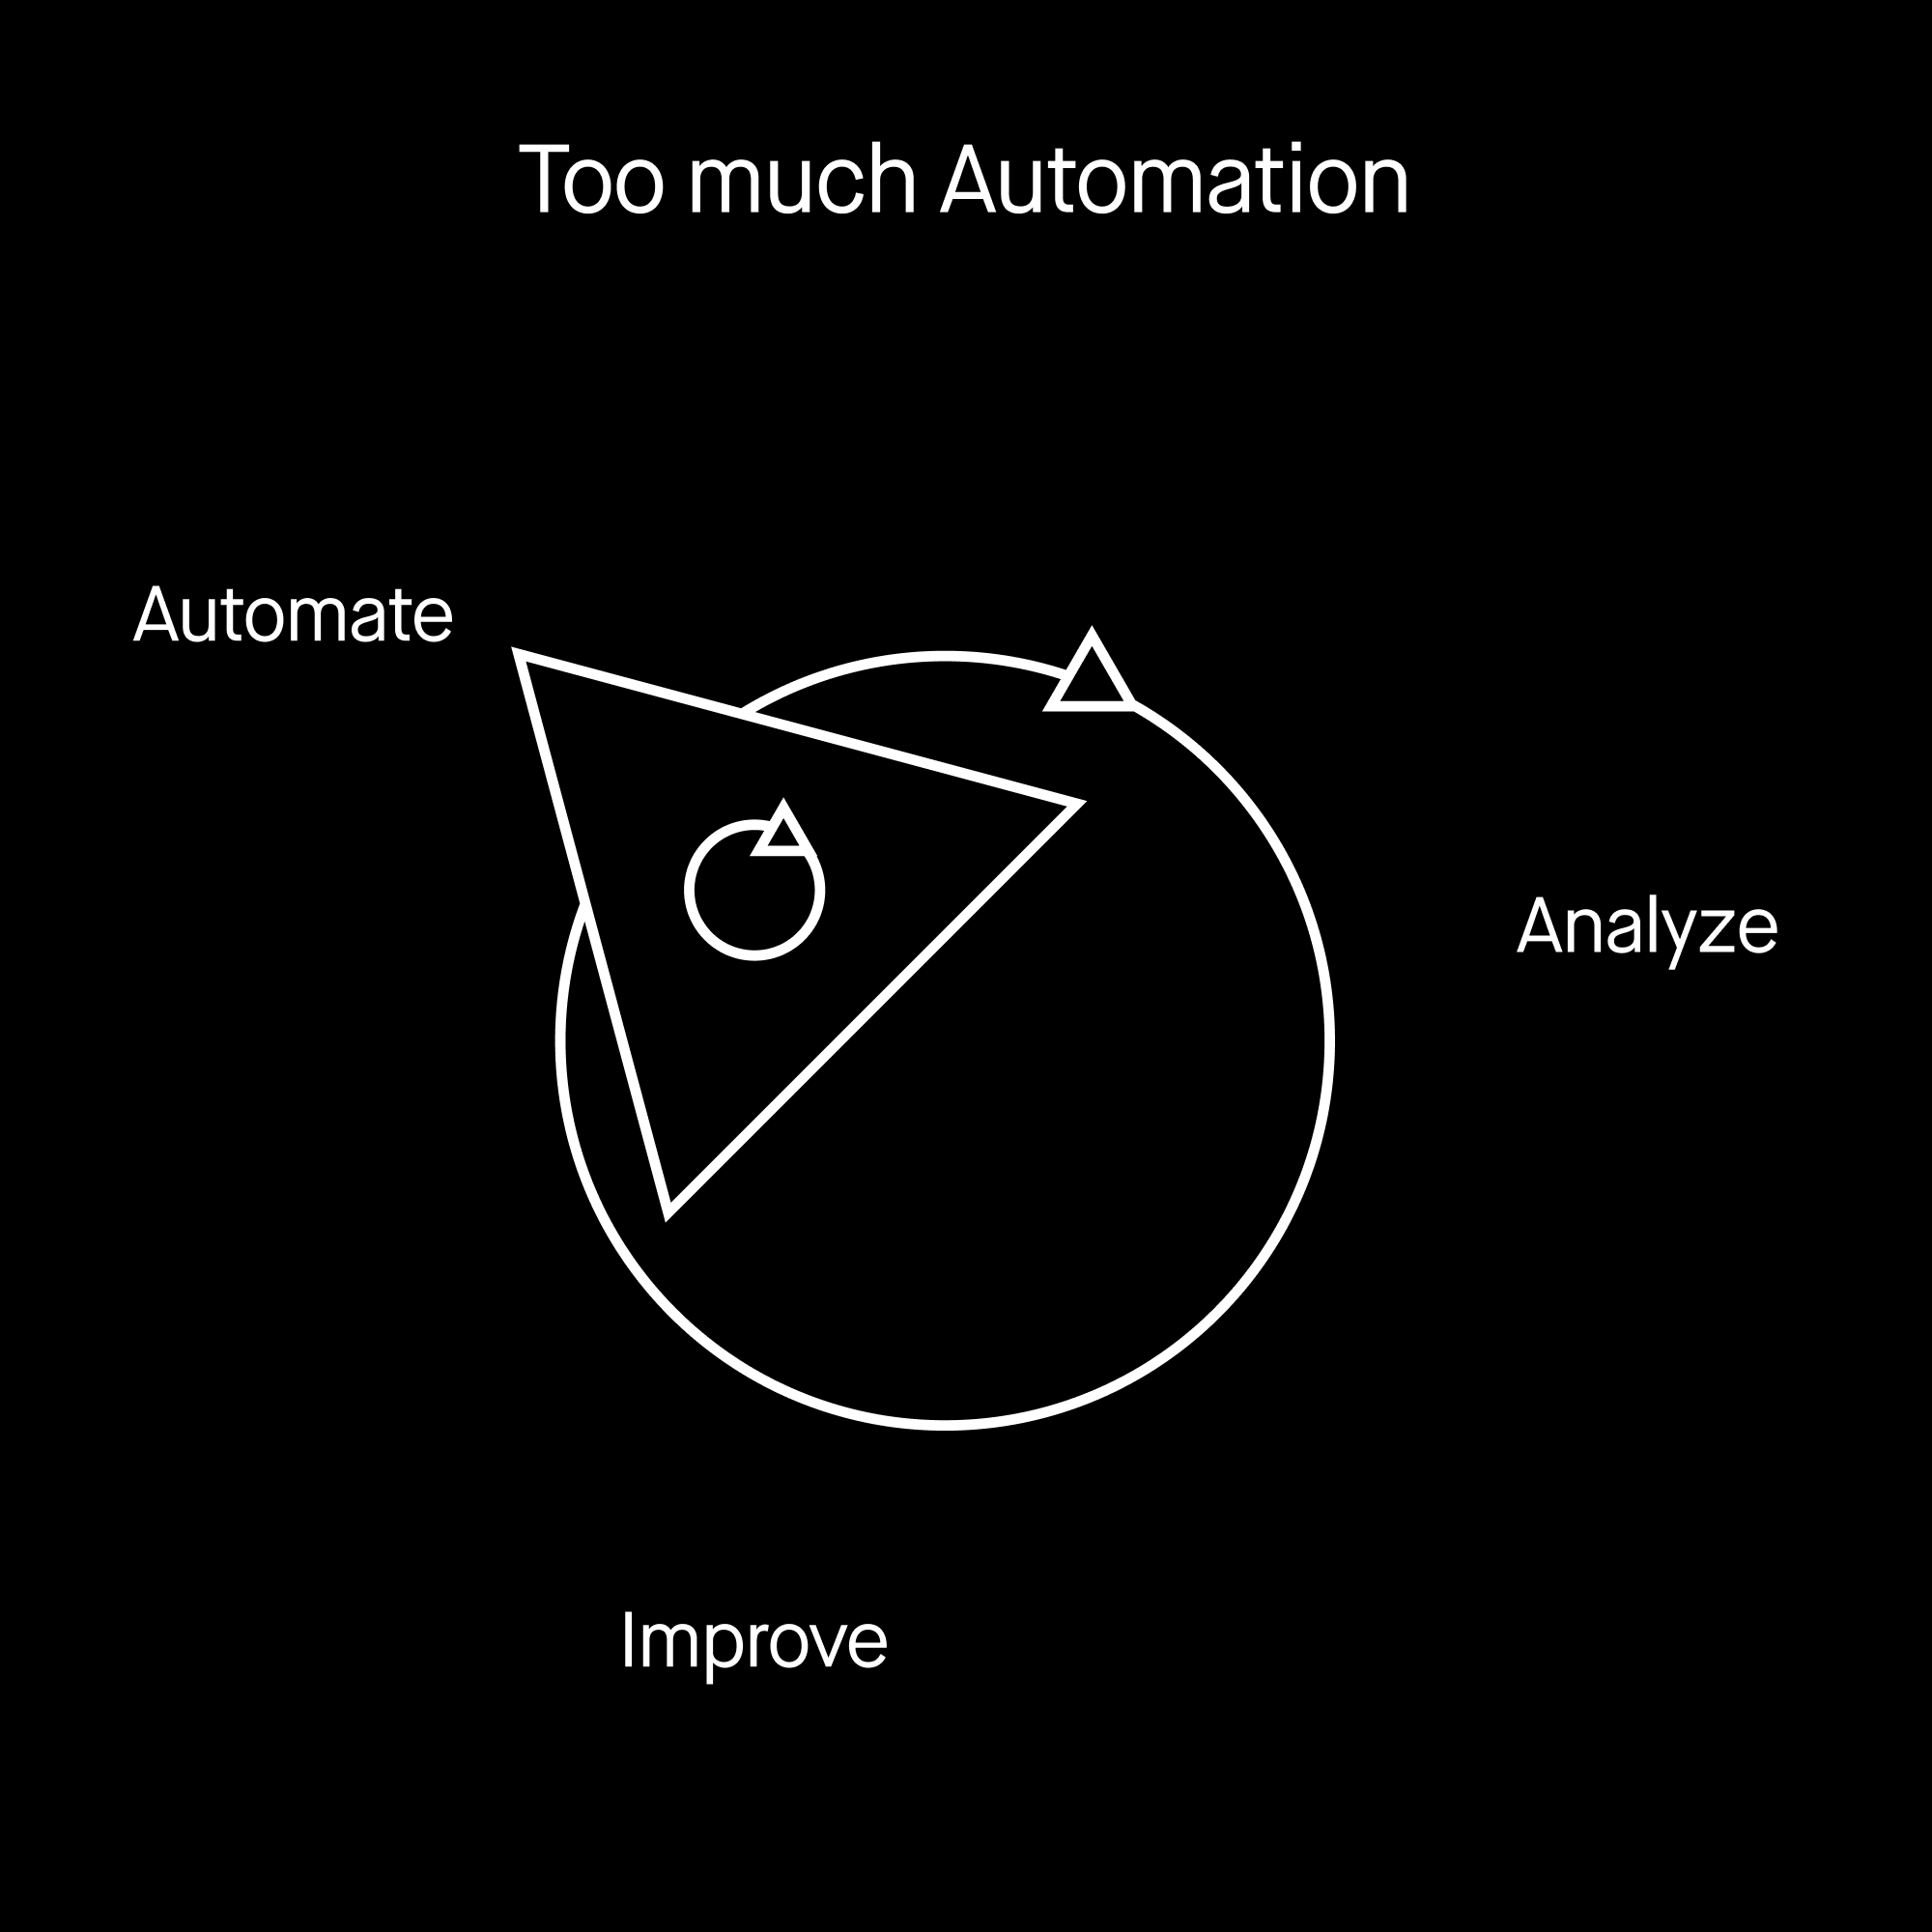 The transformation flywheel - too much automation